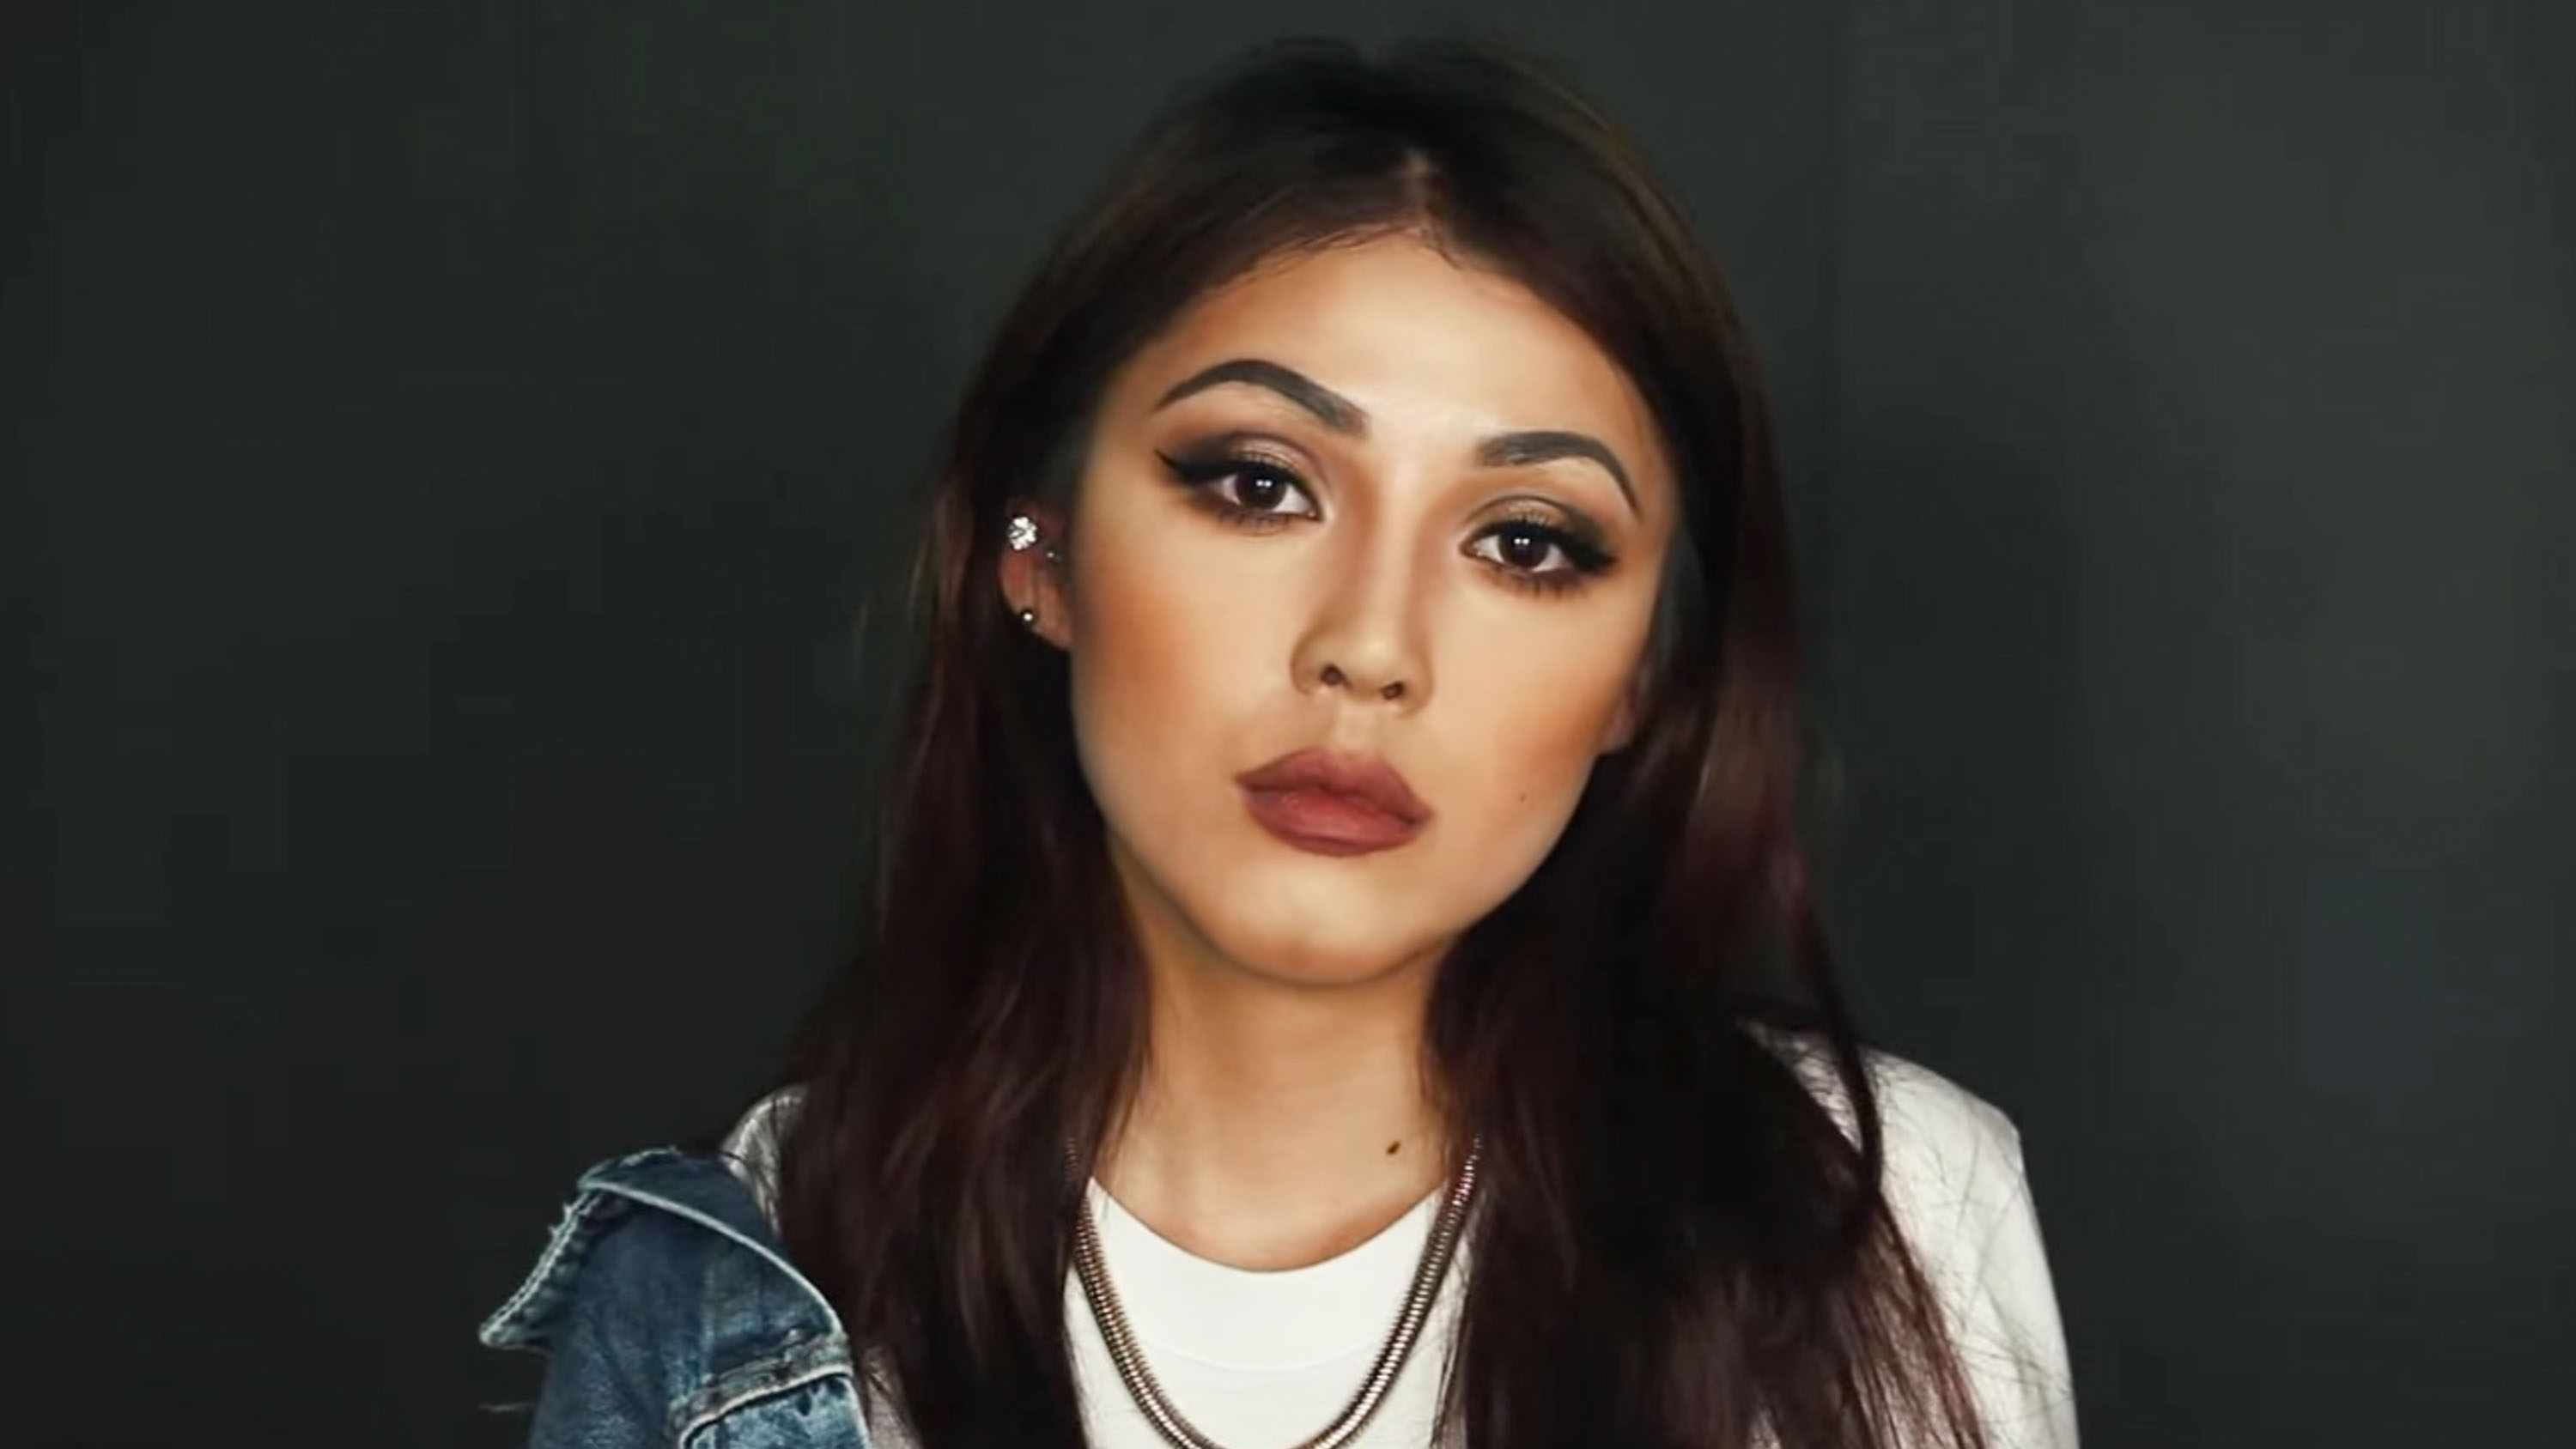 WATCH See How Korean Beauty Blogger Transforms Into Kylie Jenner